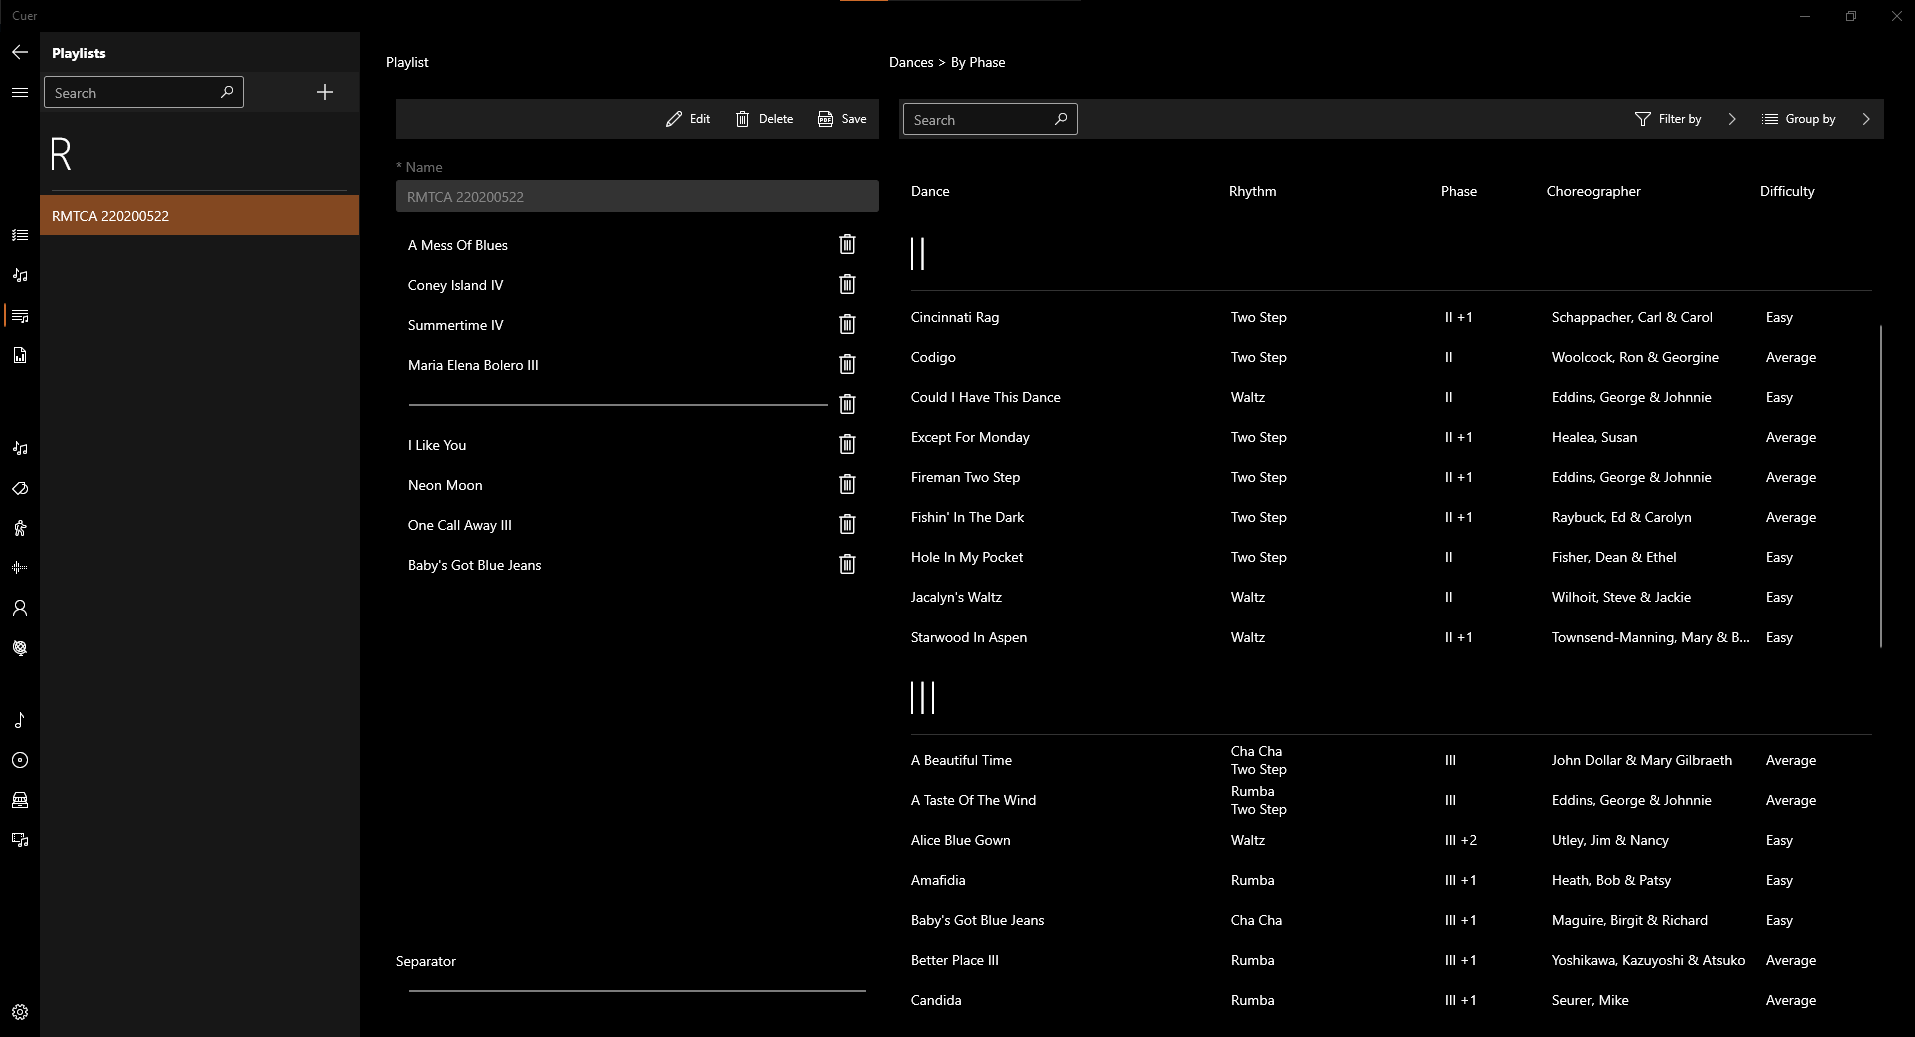 The playlist page lets you add, edit and delete playlists that can then be loaded for your program.